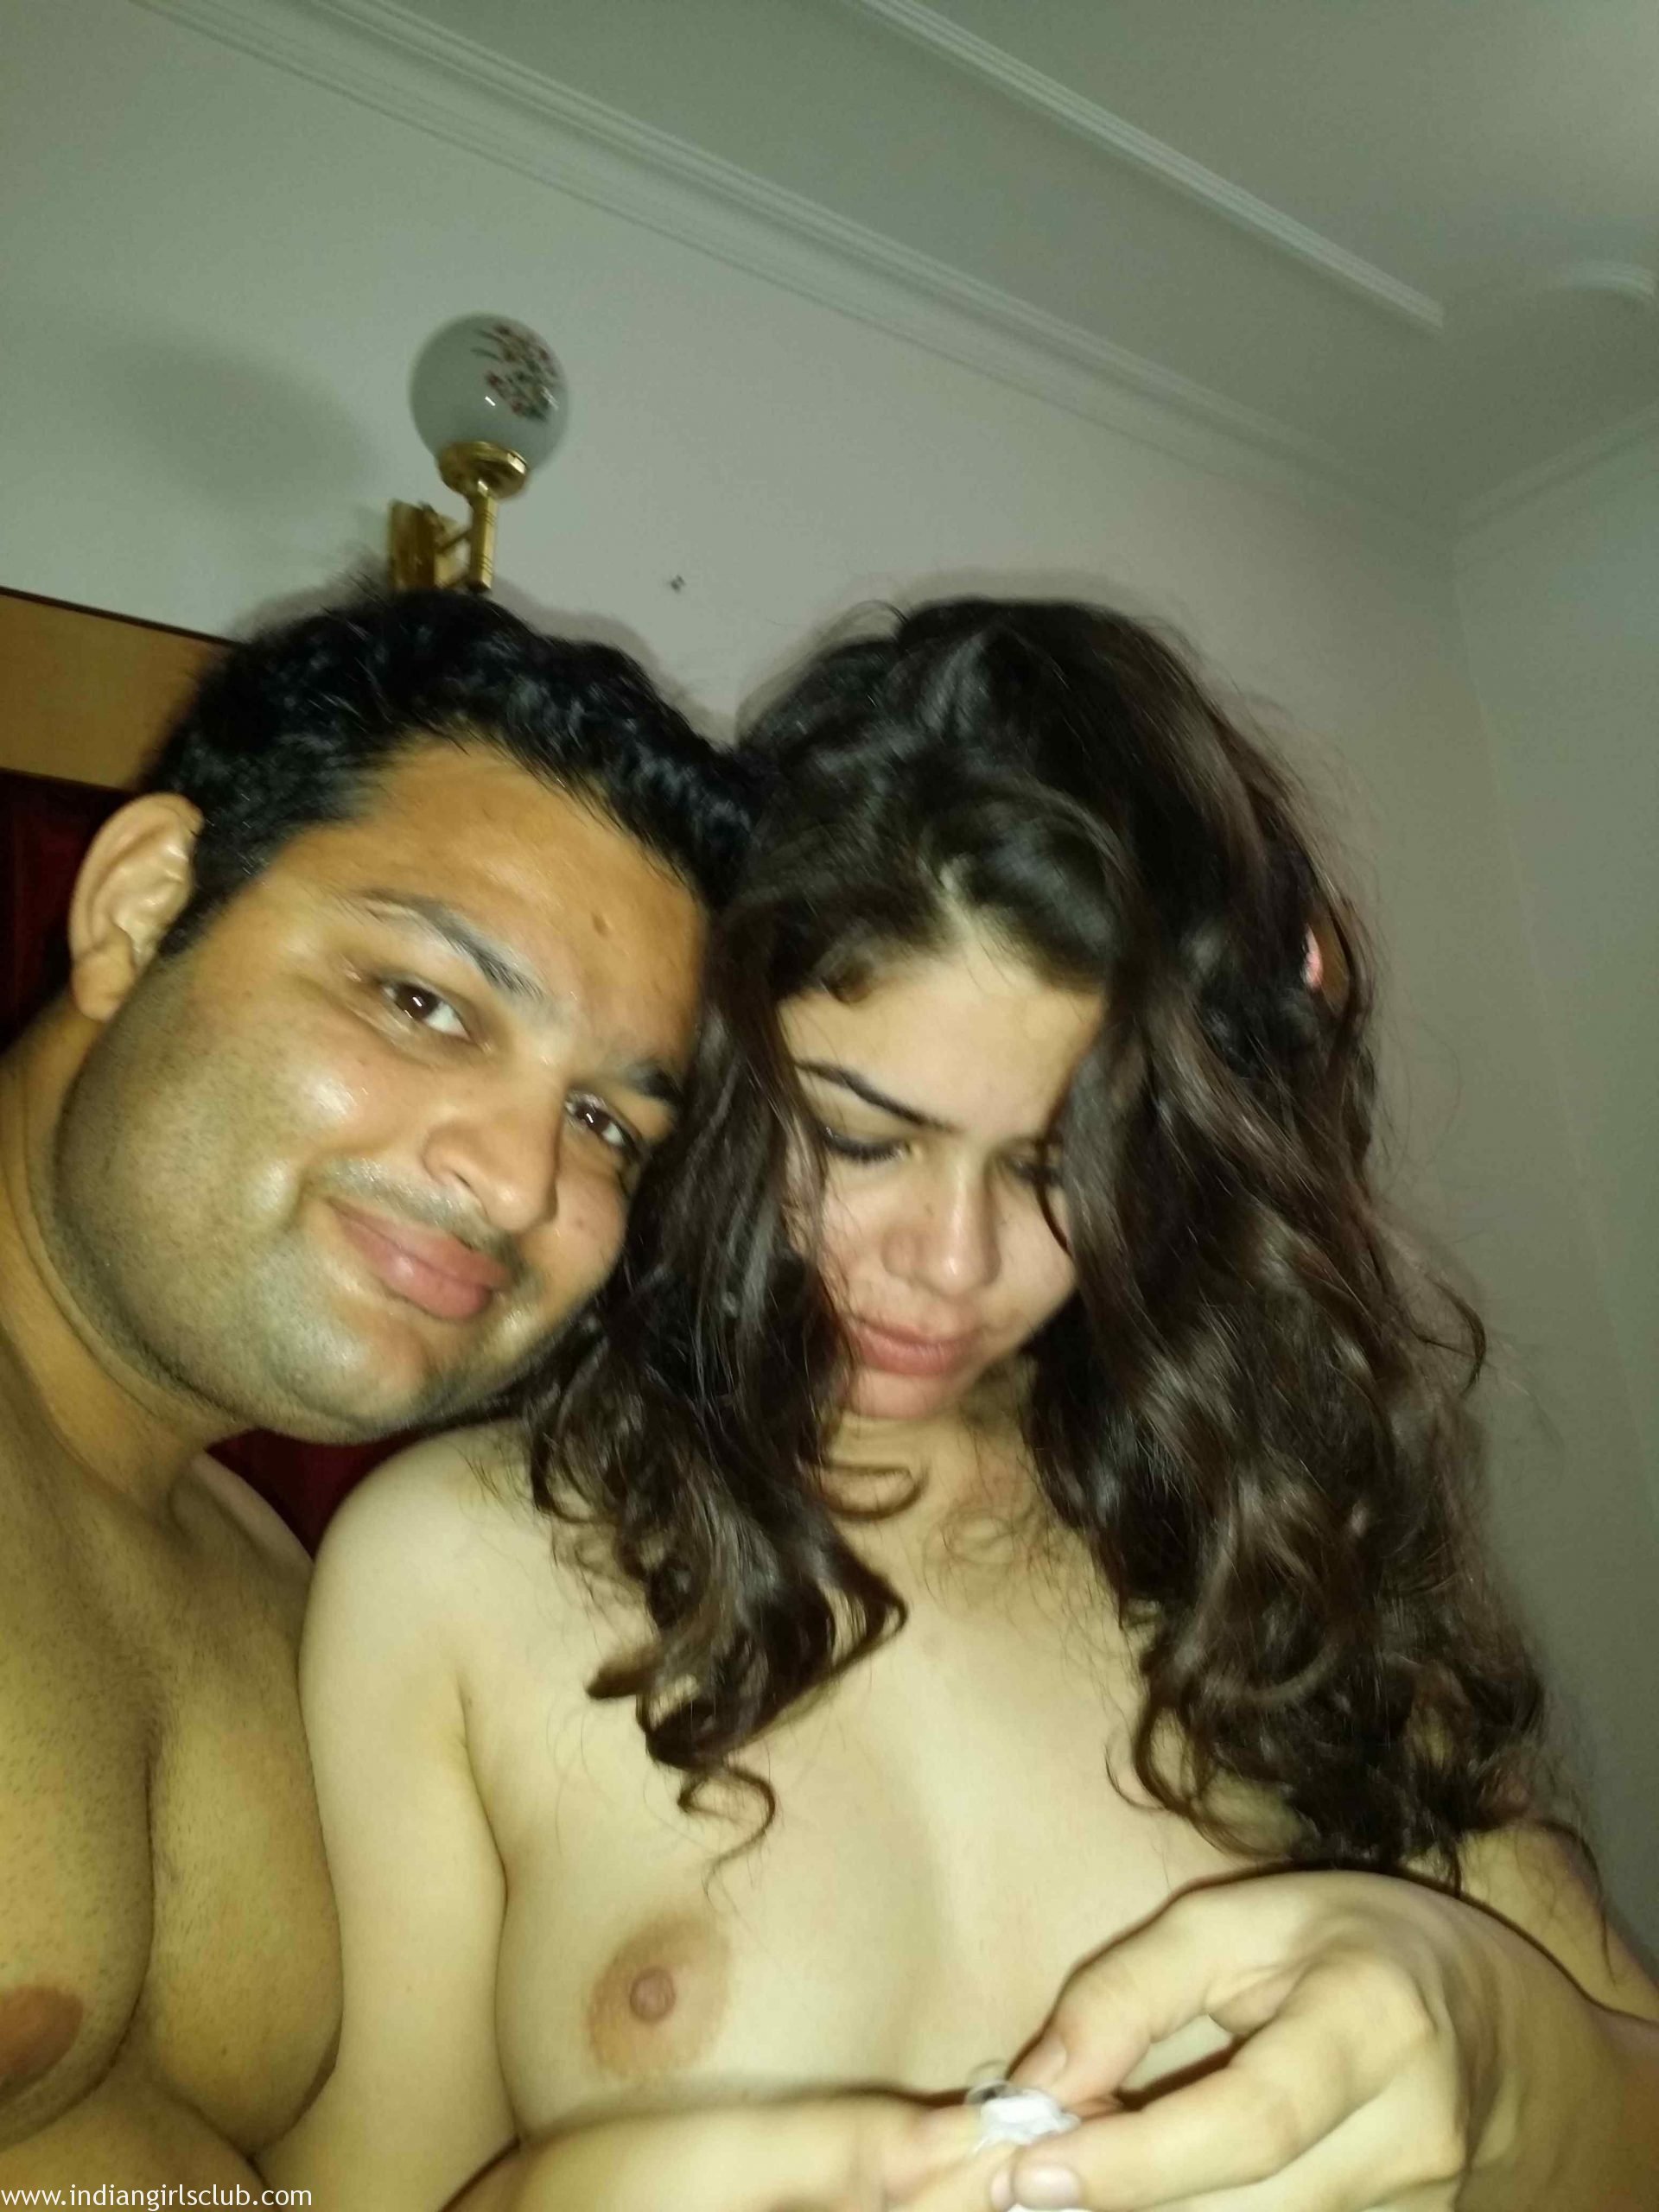 Nude Indian Sex Scandal - Indian Sex Scandals - Indian Girls Club